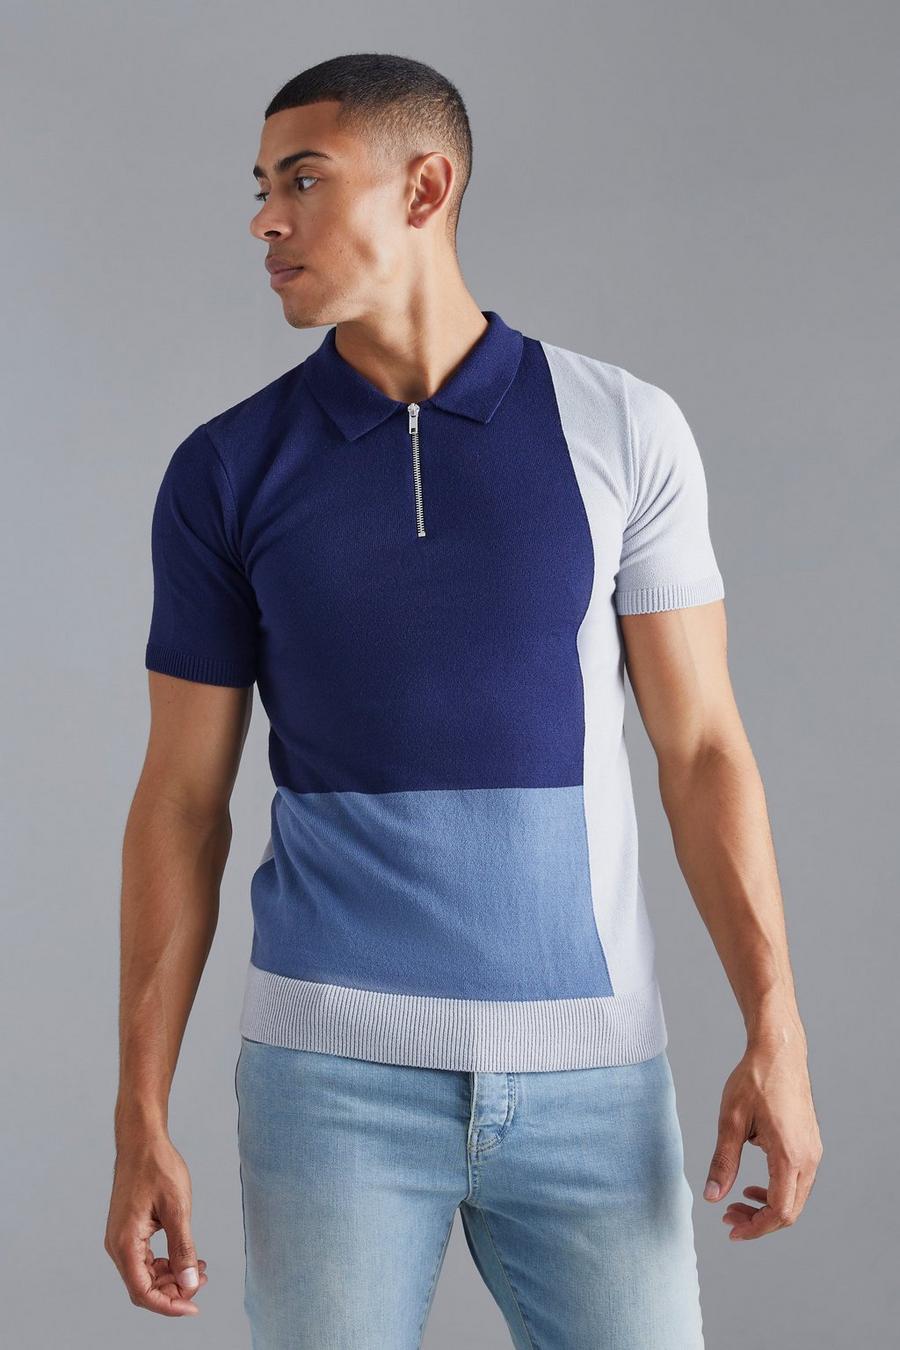 Muscle-Fit Colorblock Poloshirt, Navy